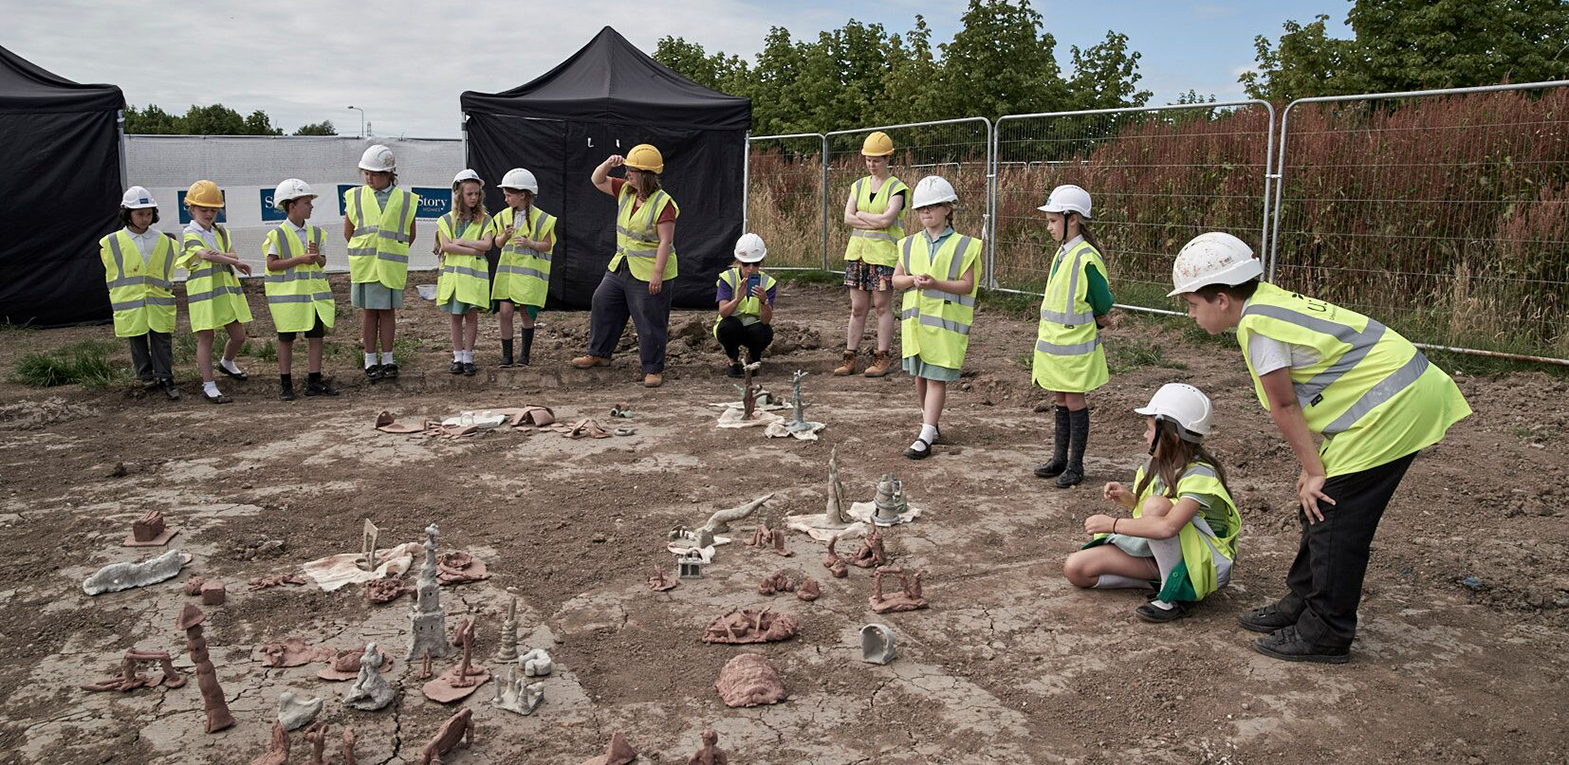 A group of children in hi-vis. led by the artist survey the model village that they have created out of clay